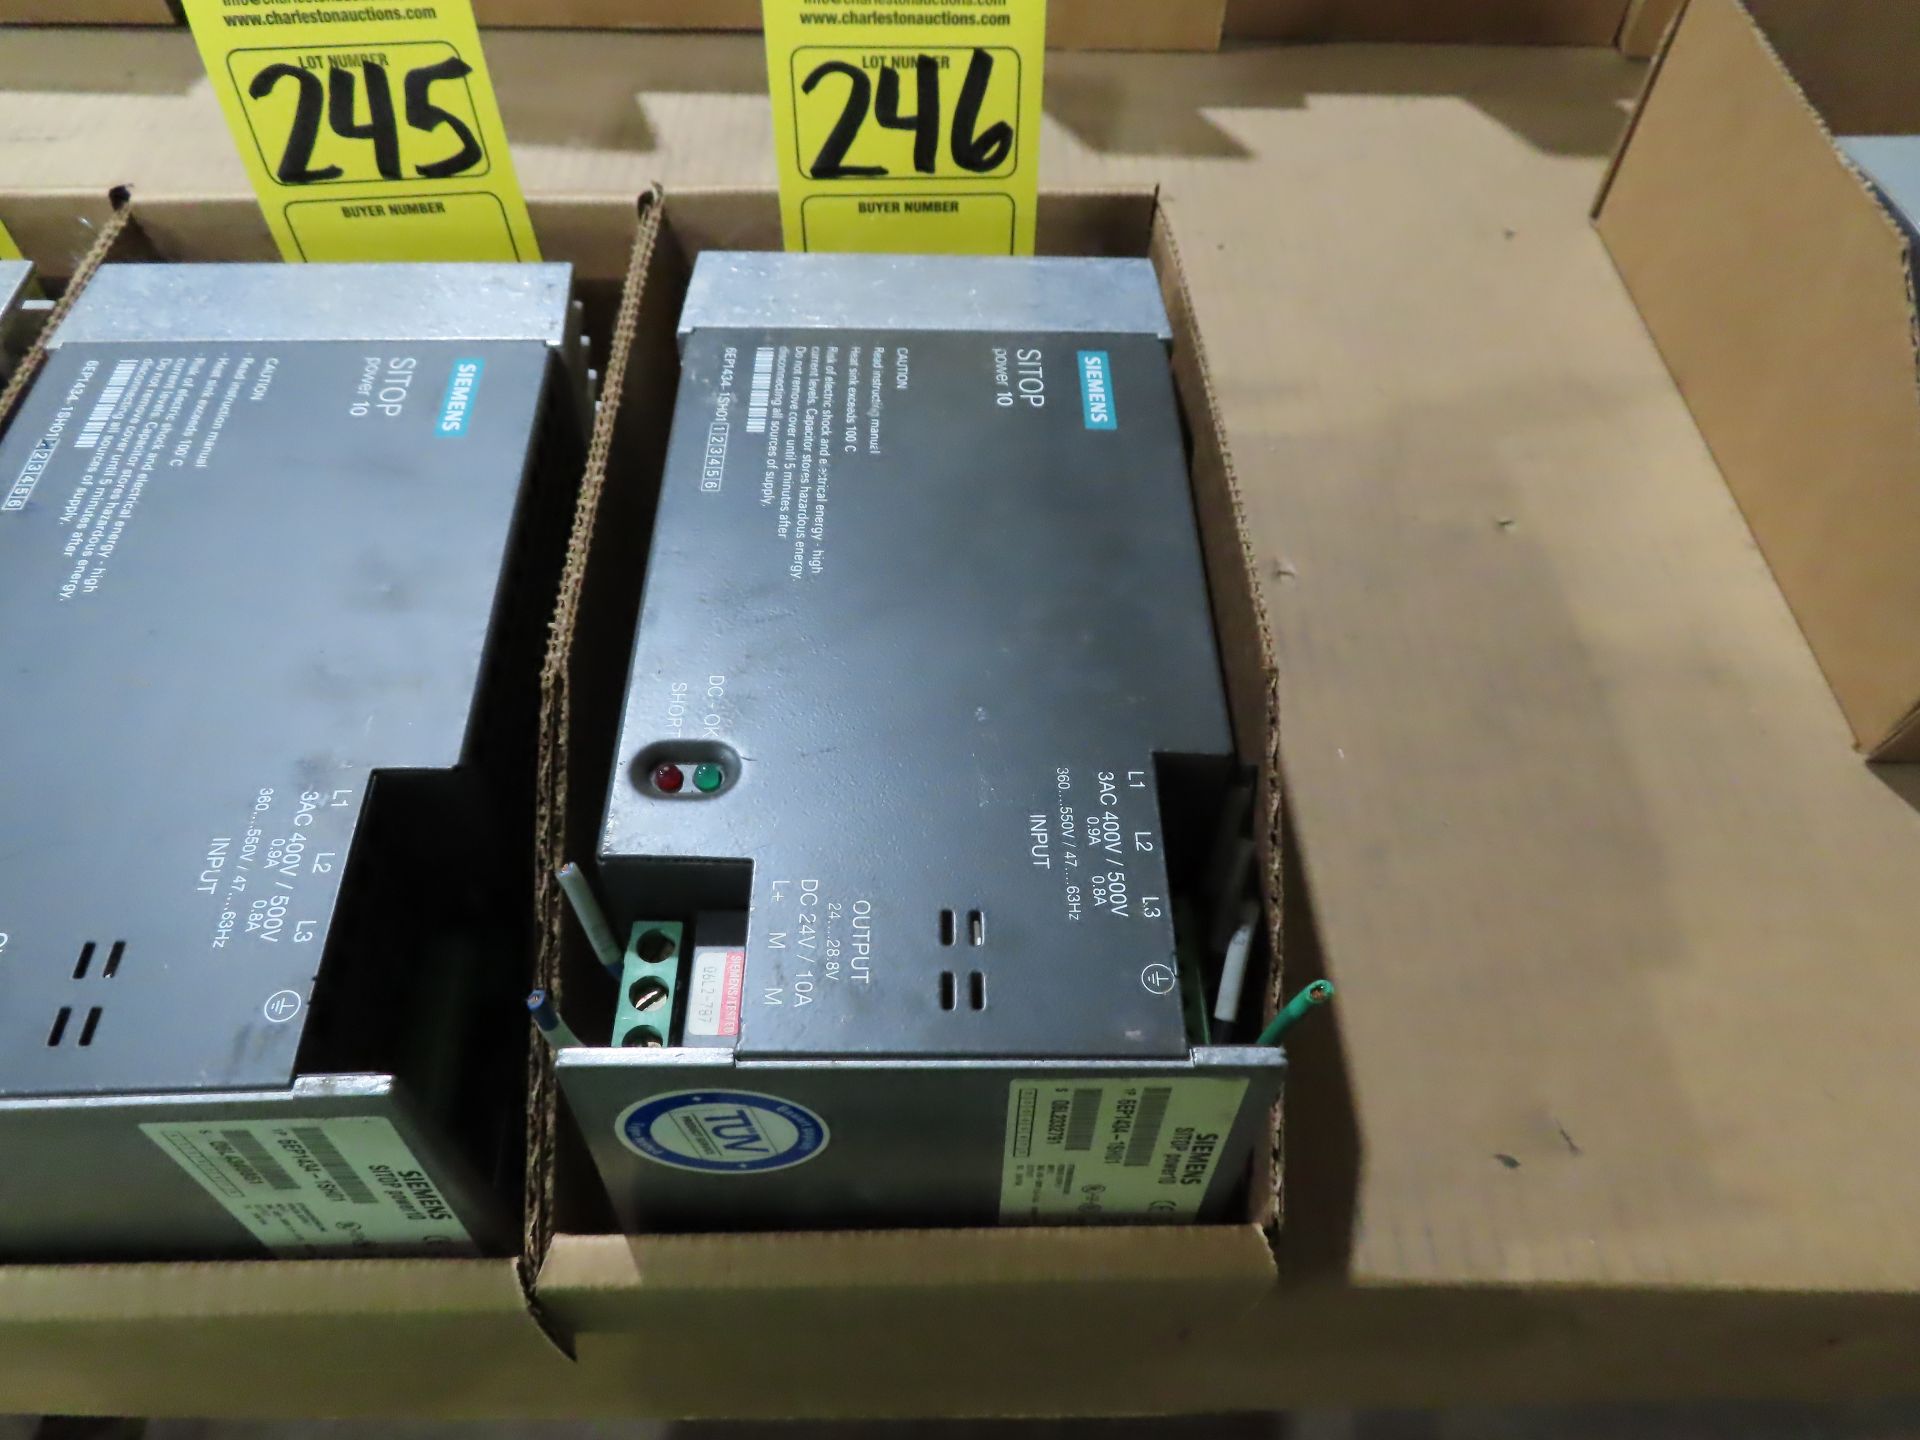 Siemens model 6EP1434-1SH01 power supply , as always, with Brolyn LLC auctions, all lots can be